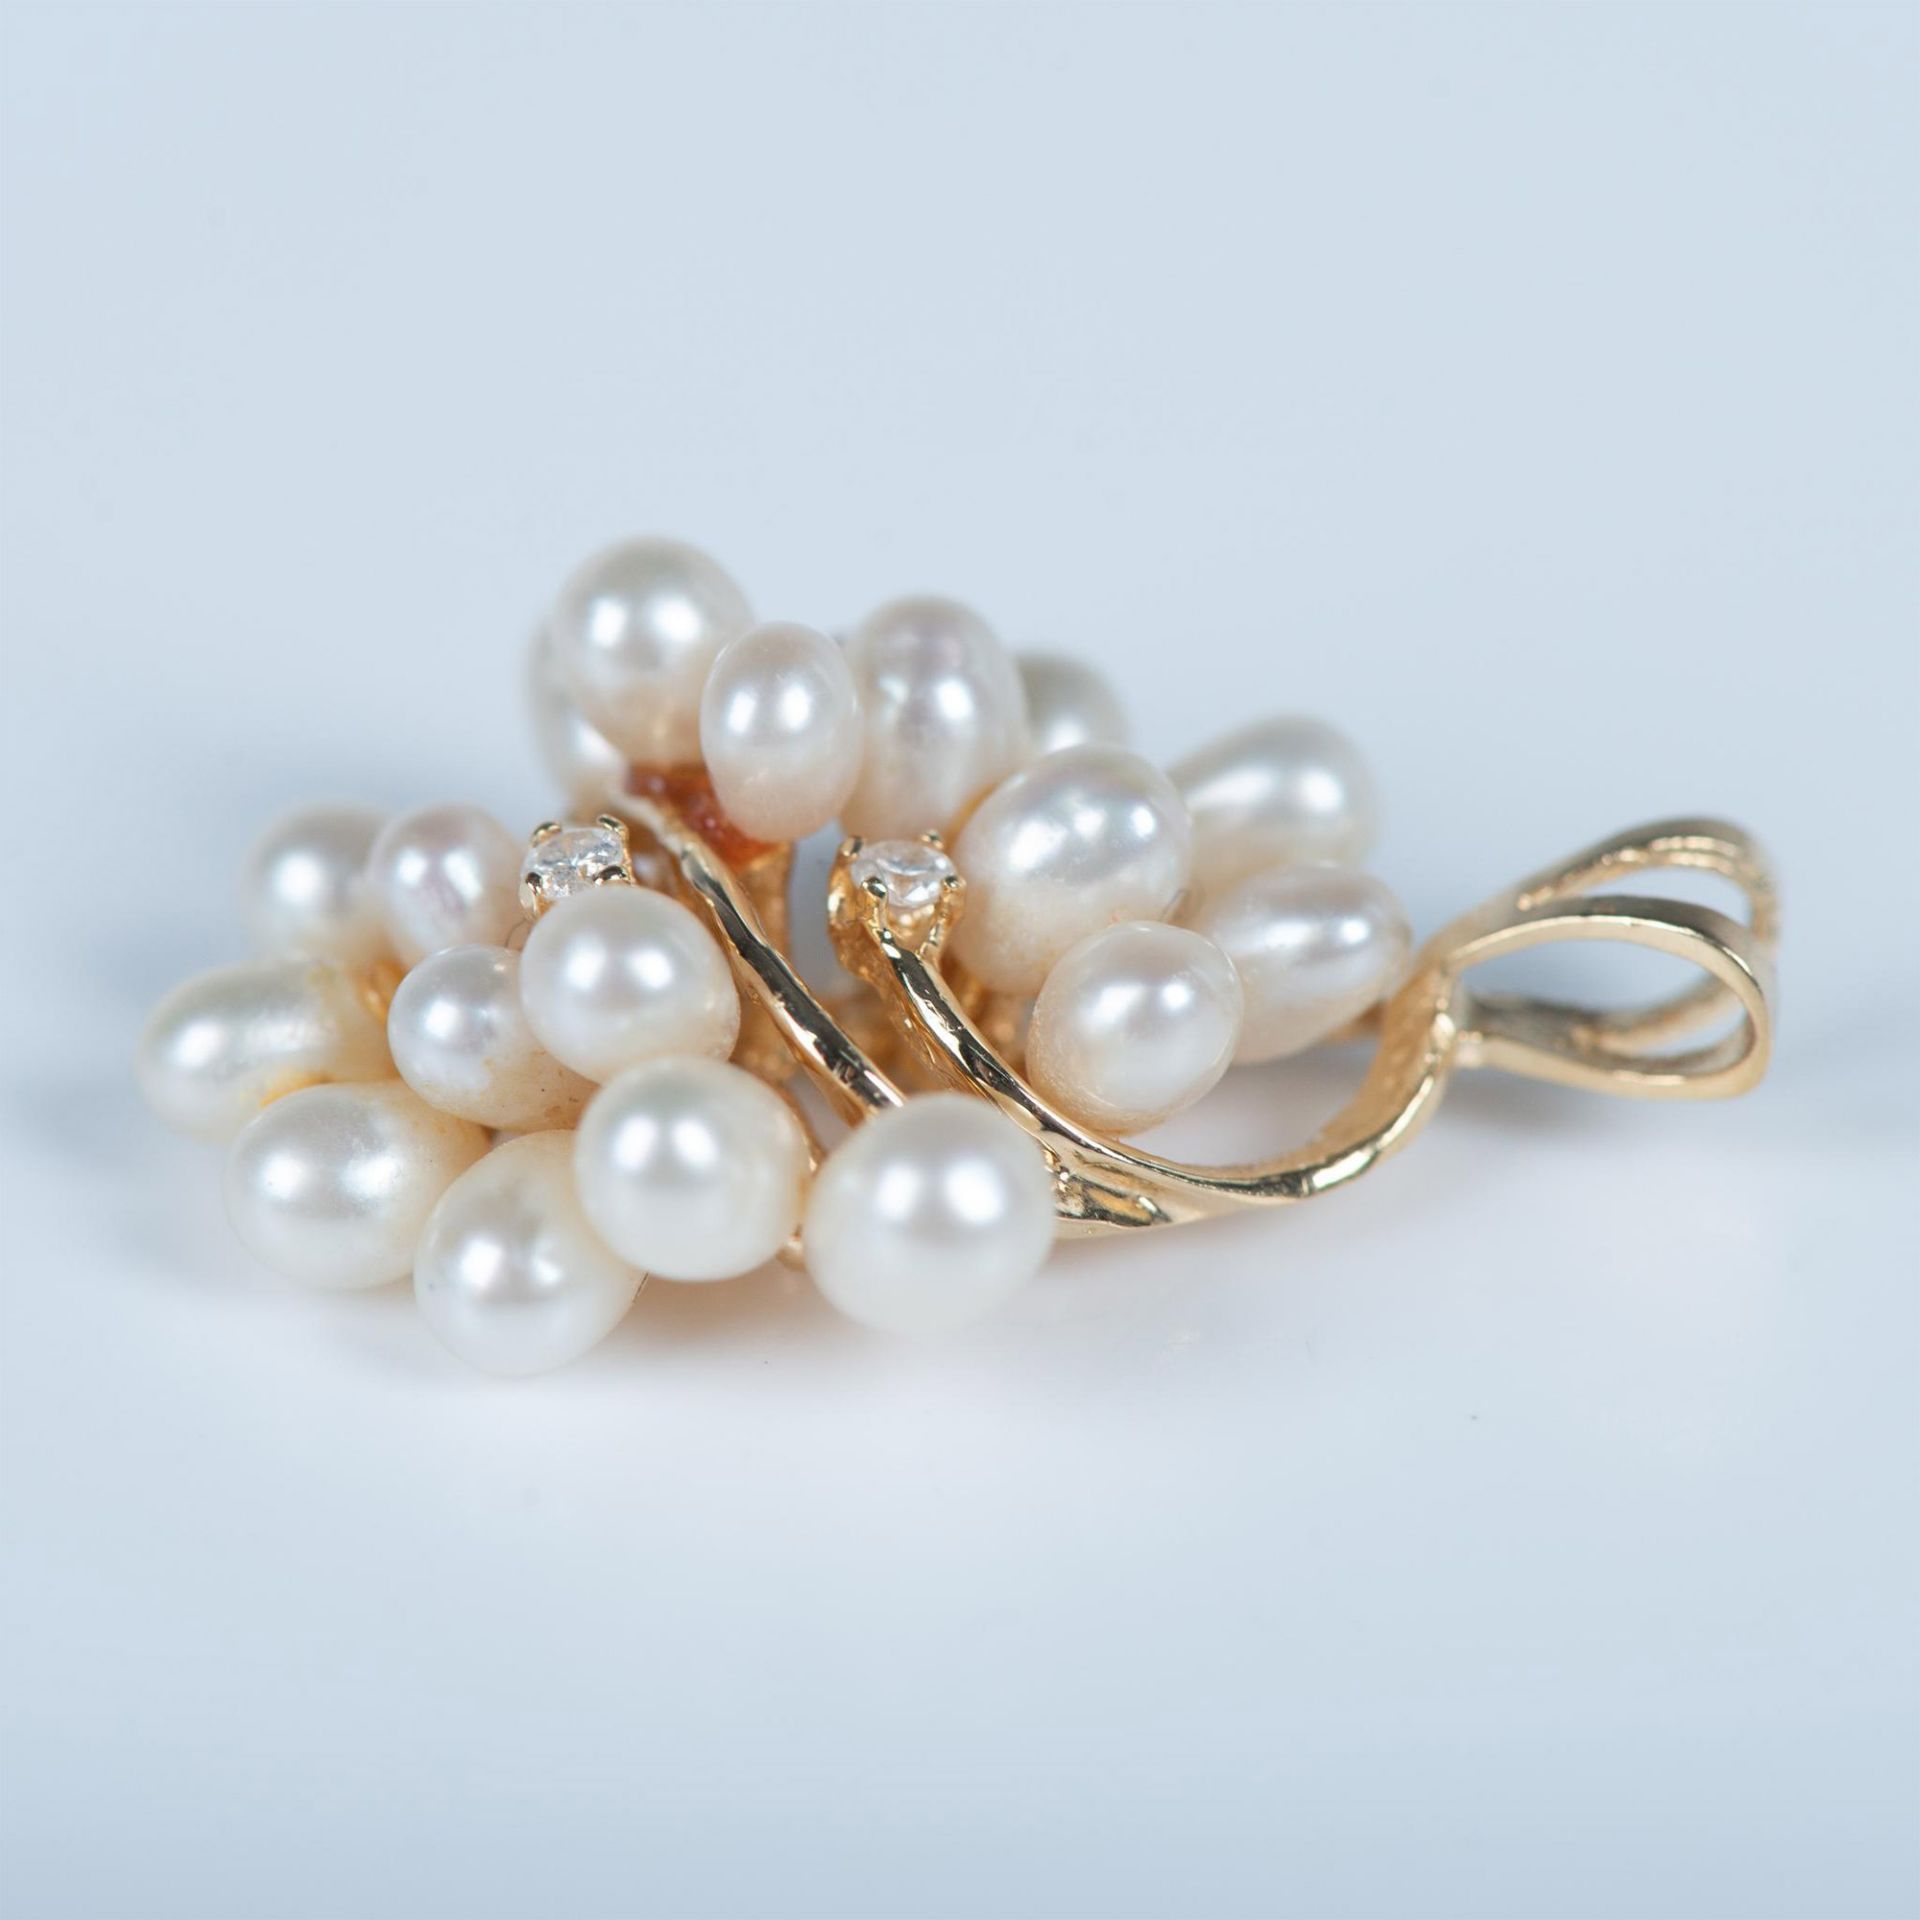 Fancy Vintage 14K Gold, Diamond and Pearl Cluster Pendant - Image 3 of 4